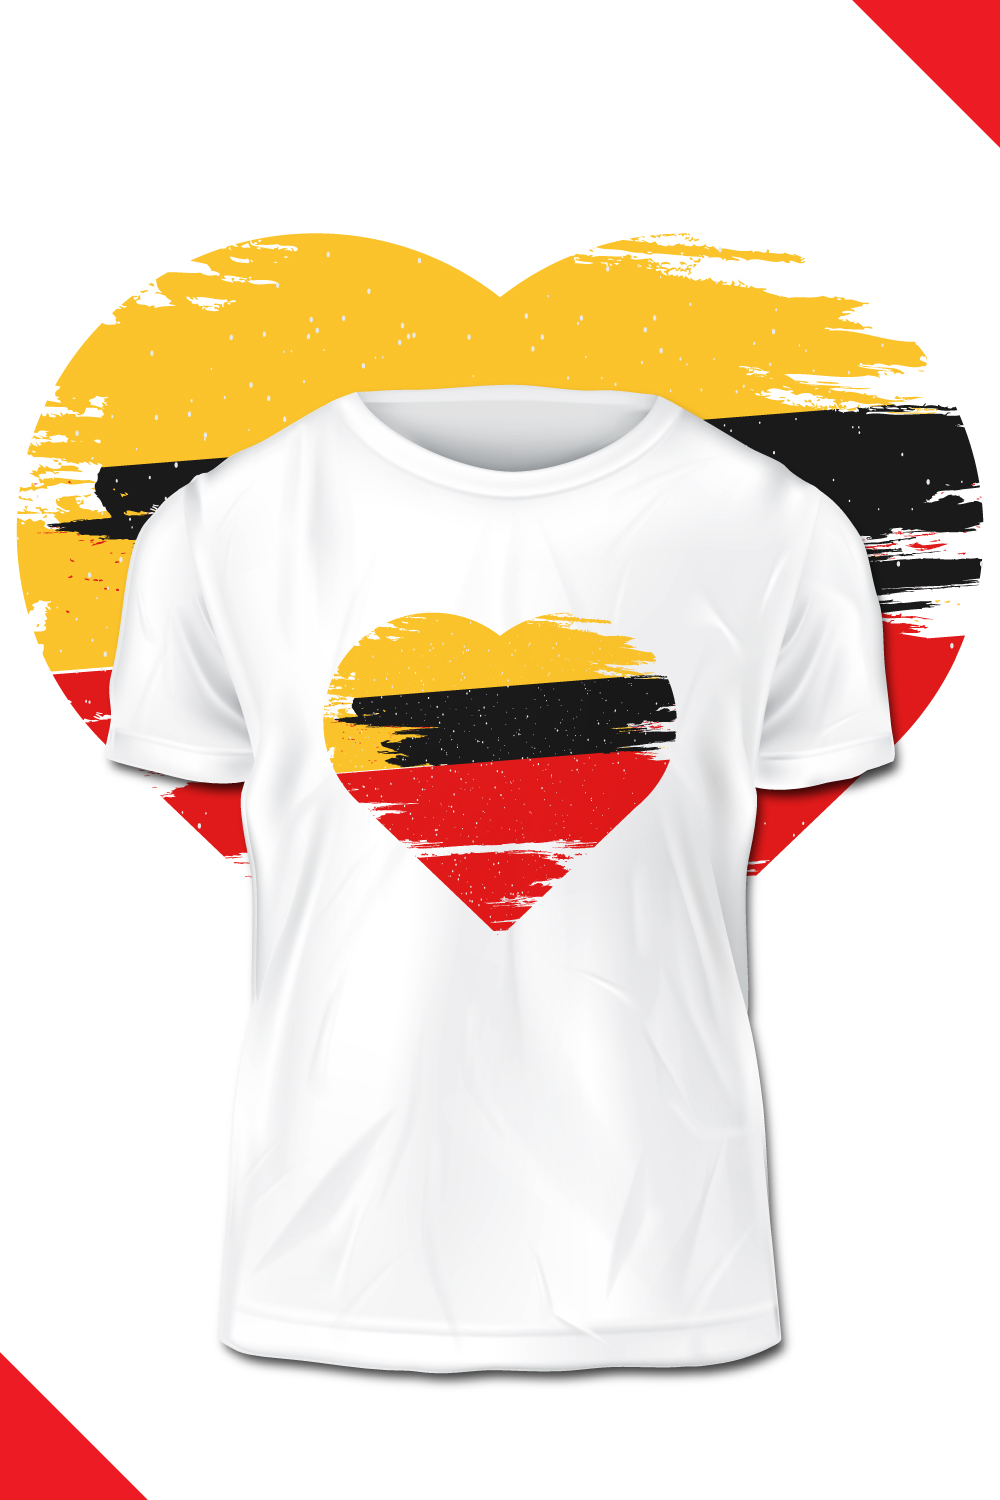 Germany T-shirt Design pinterest preview image.